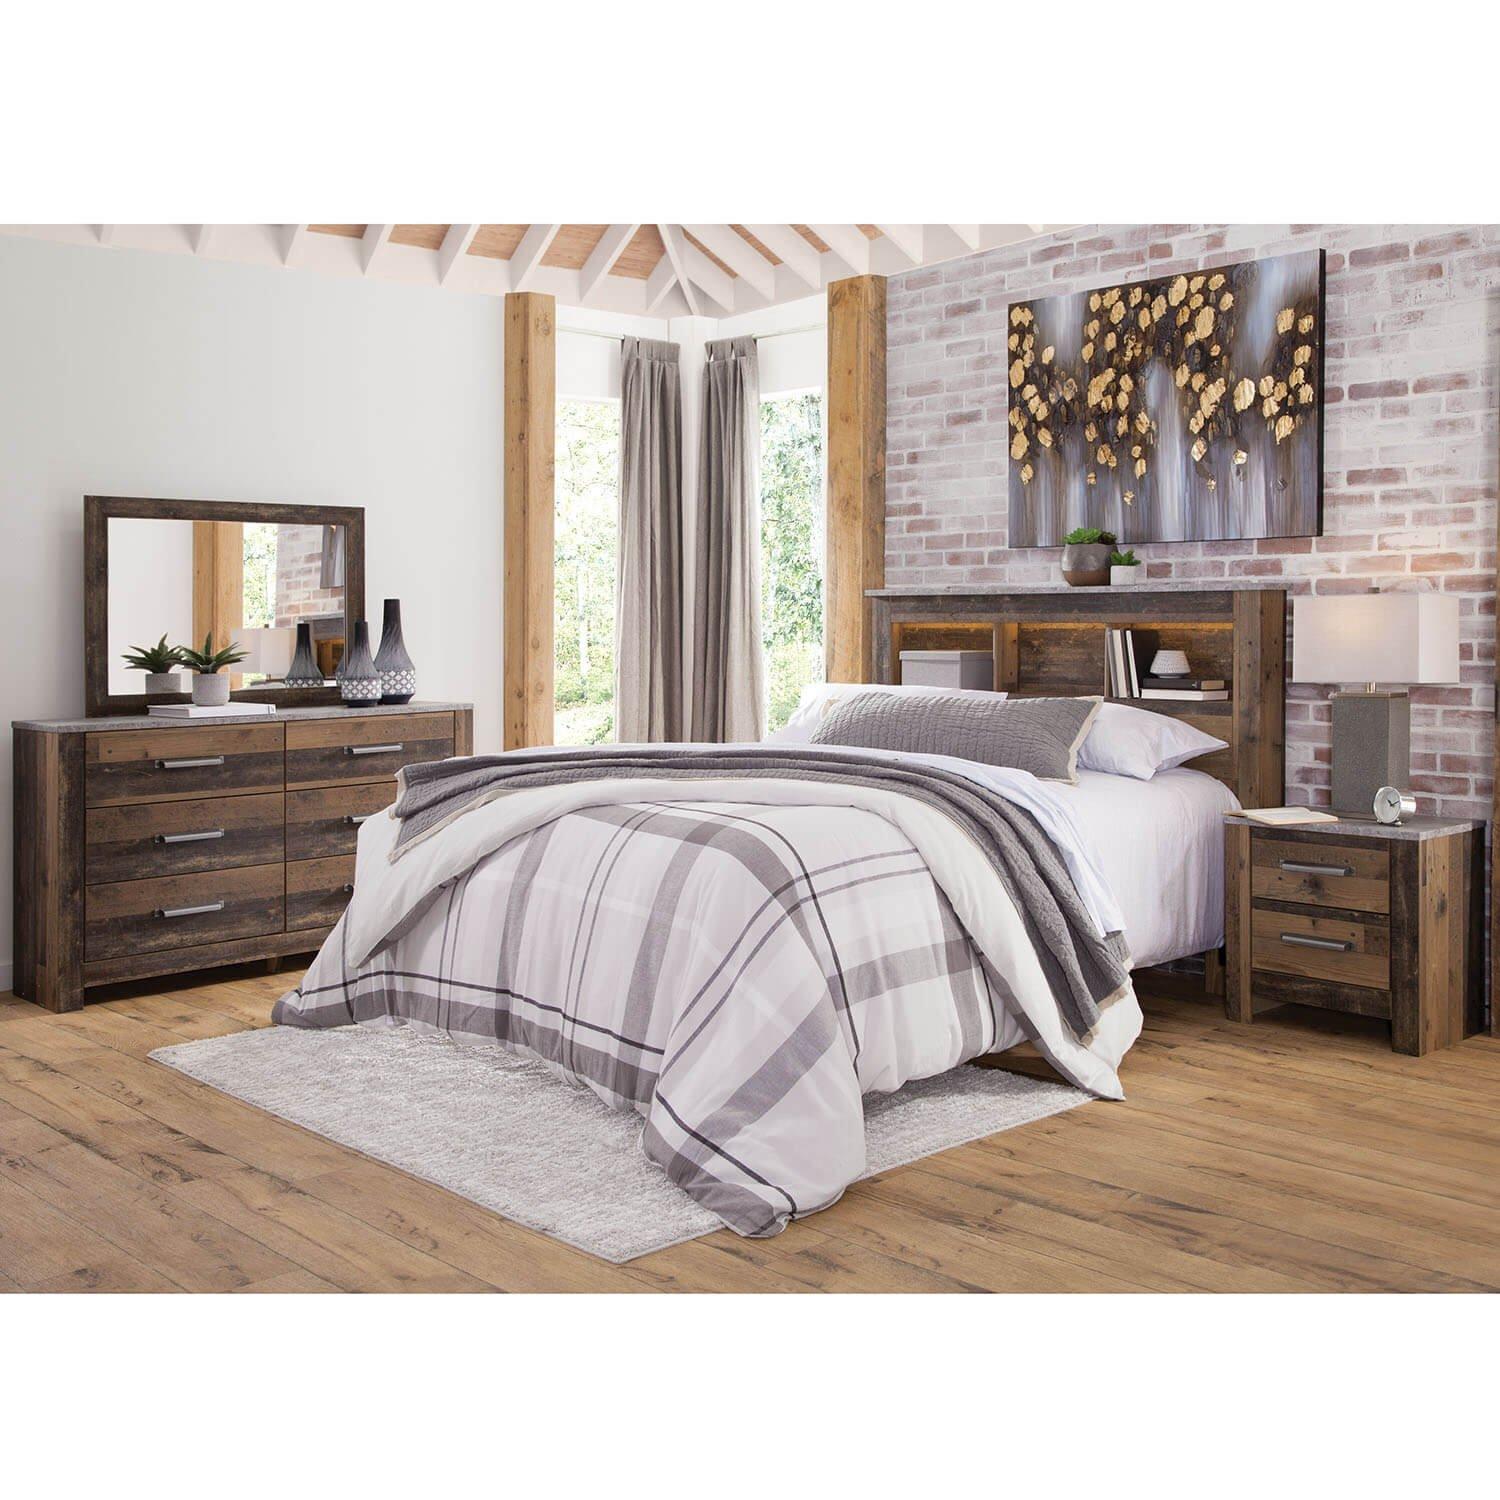 Rent To Own Ashley 4 Piece Chadbrook Queen Bedroom Set At Aaron S Today